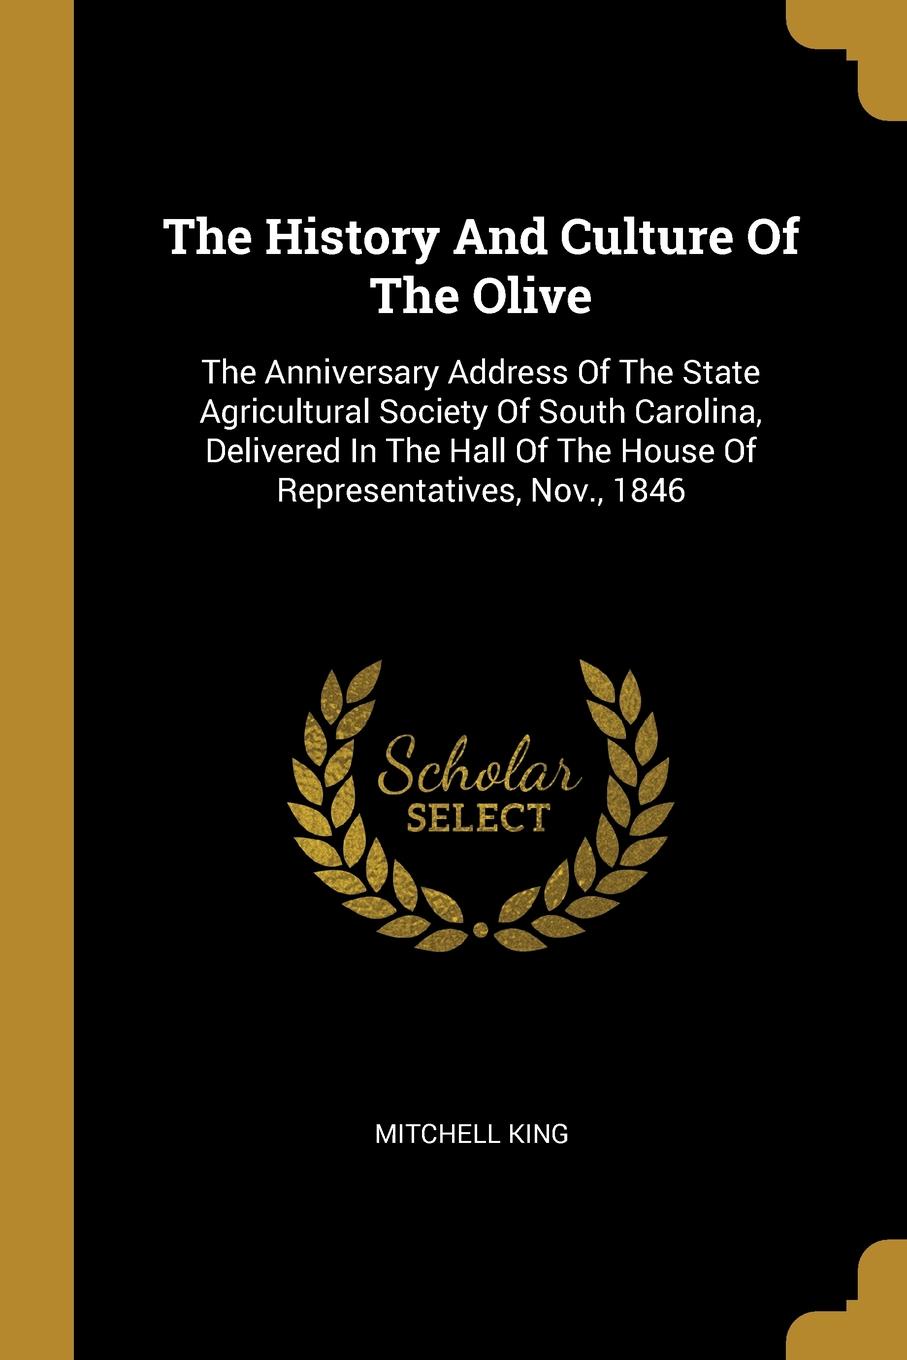 The History And Culture Of The Olive. The Anniversary Address Of The State Agricultural Society Of South Carolina, Delivered In The Hall Of The House Of Representatives, Nov., 1846